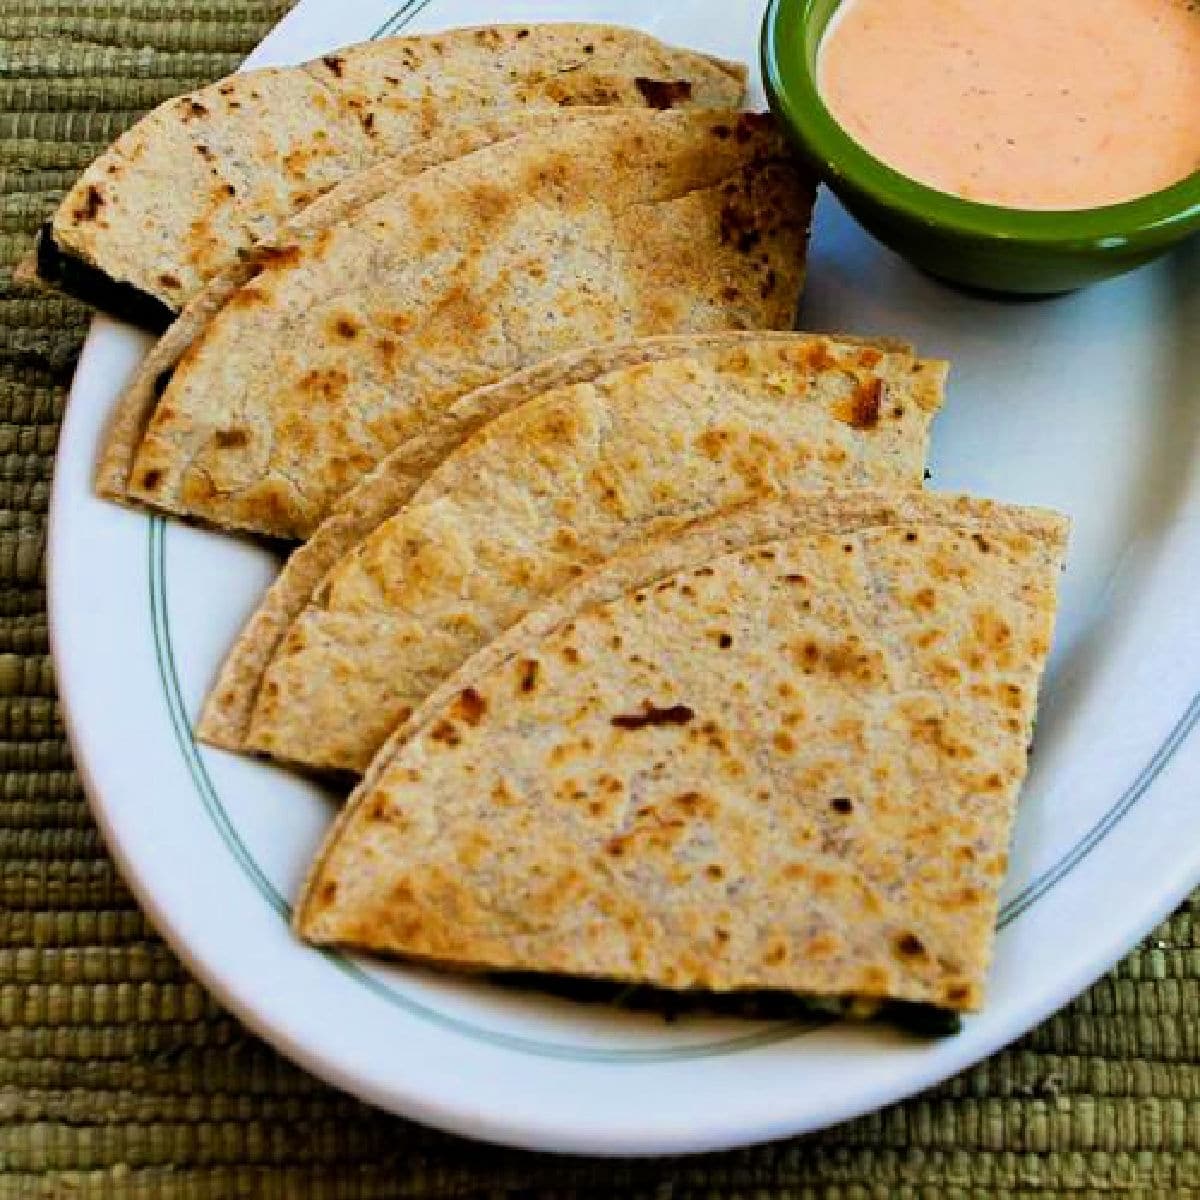 Kale Quesadillas shown on serving plate with Sriracha-Ranch Dipping Sauce